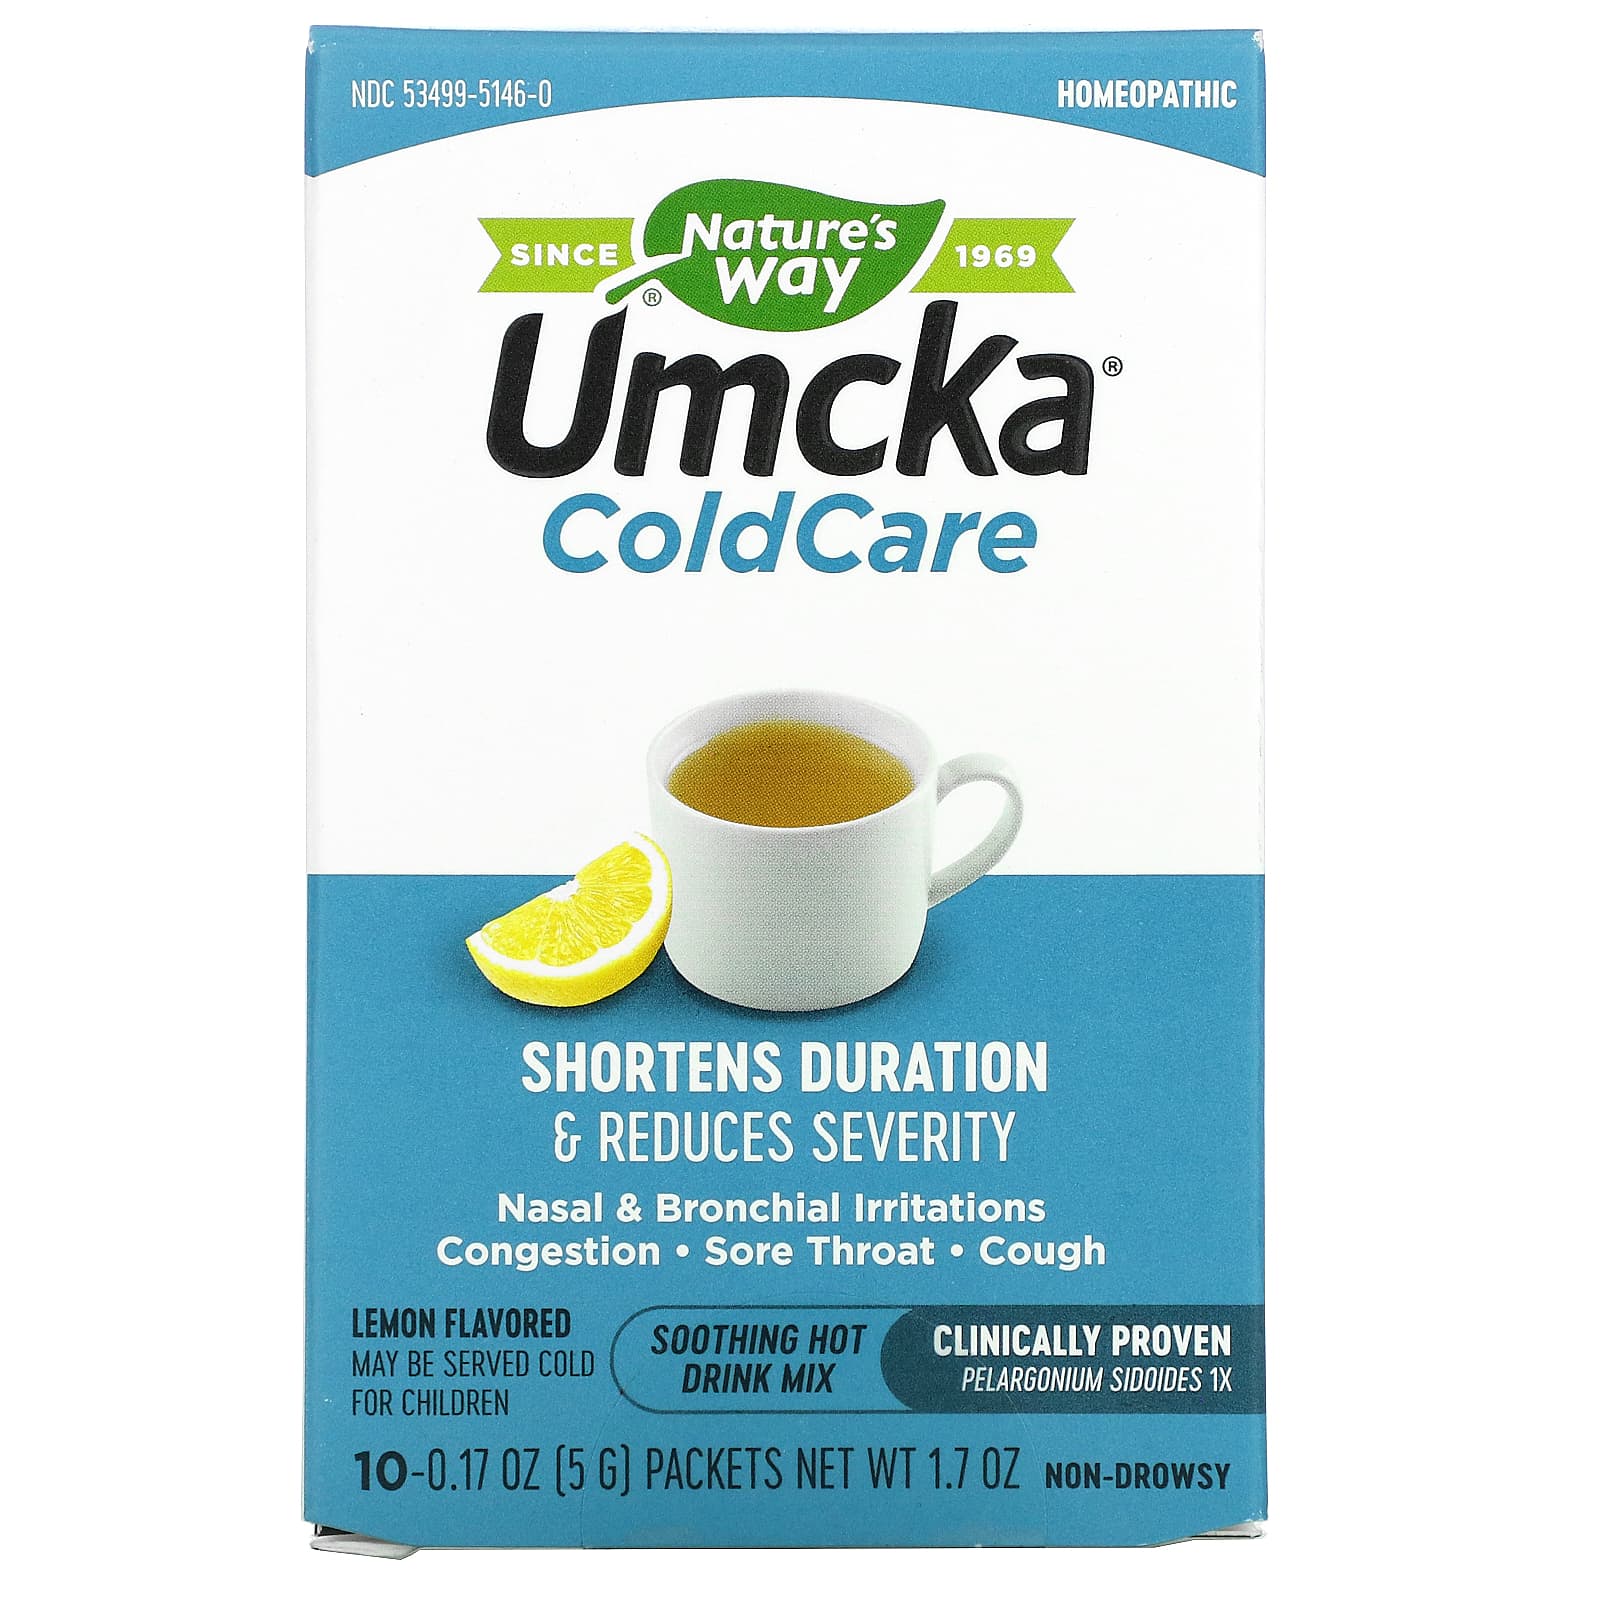 umcka, umcka hot drink, lemon hot drink, cold care, cold support, cold relief, natural cold relief, cough relief, natural cough relief, pelargonium sidoides, pelargonium, congestion, sore throat